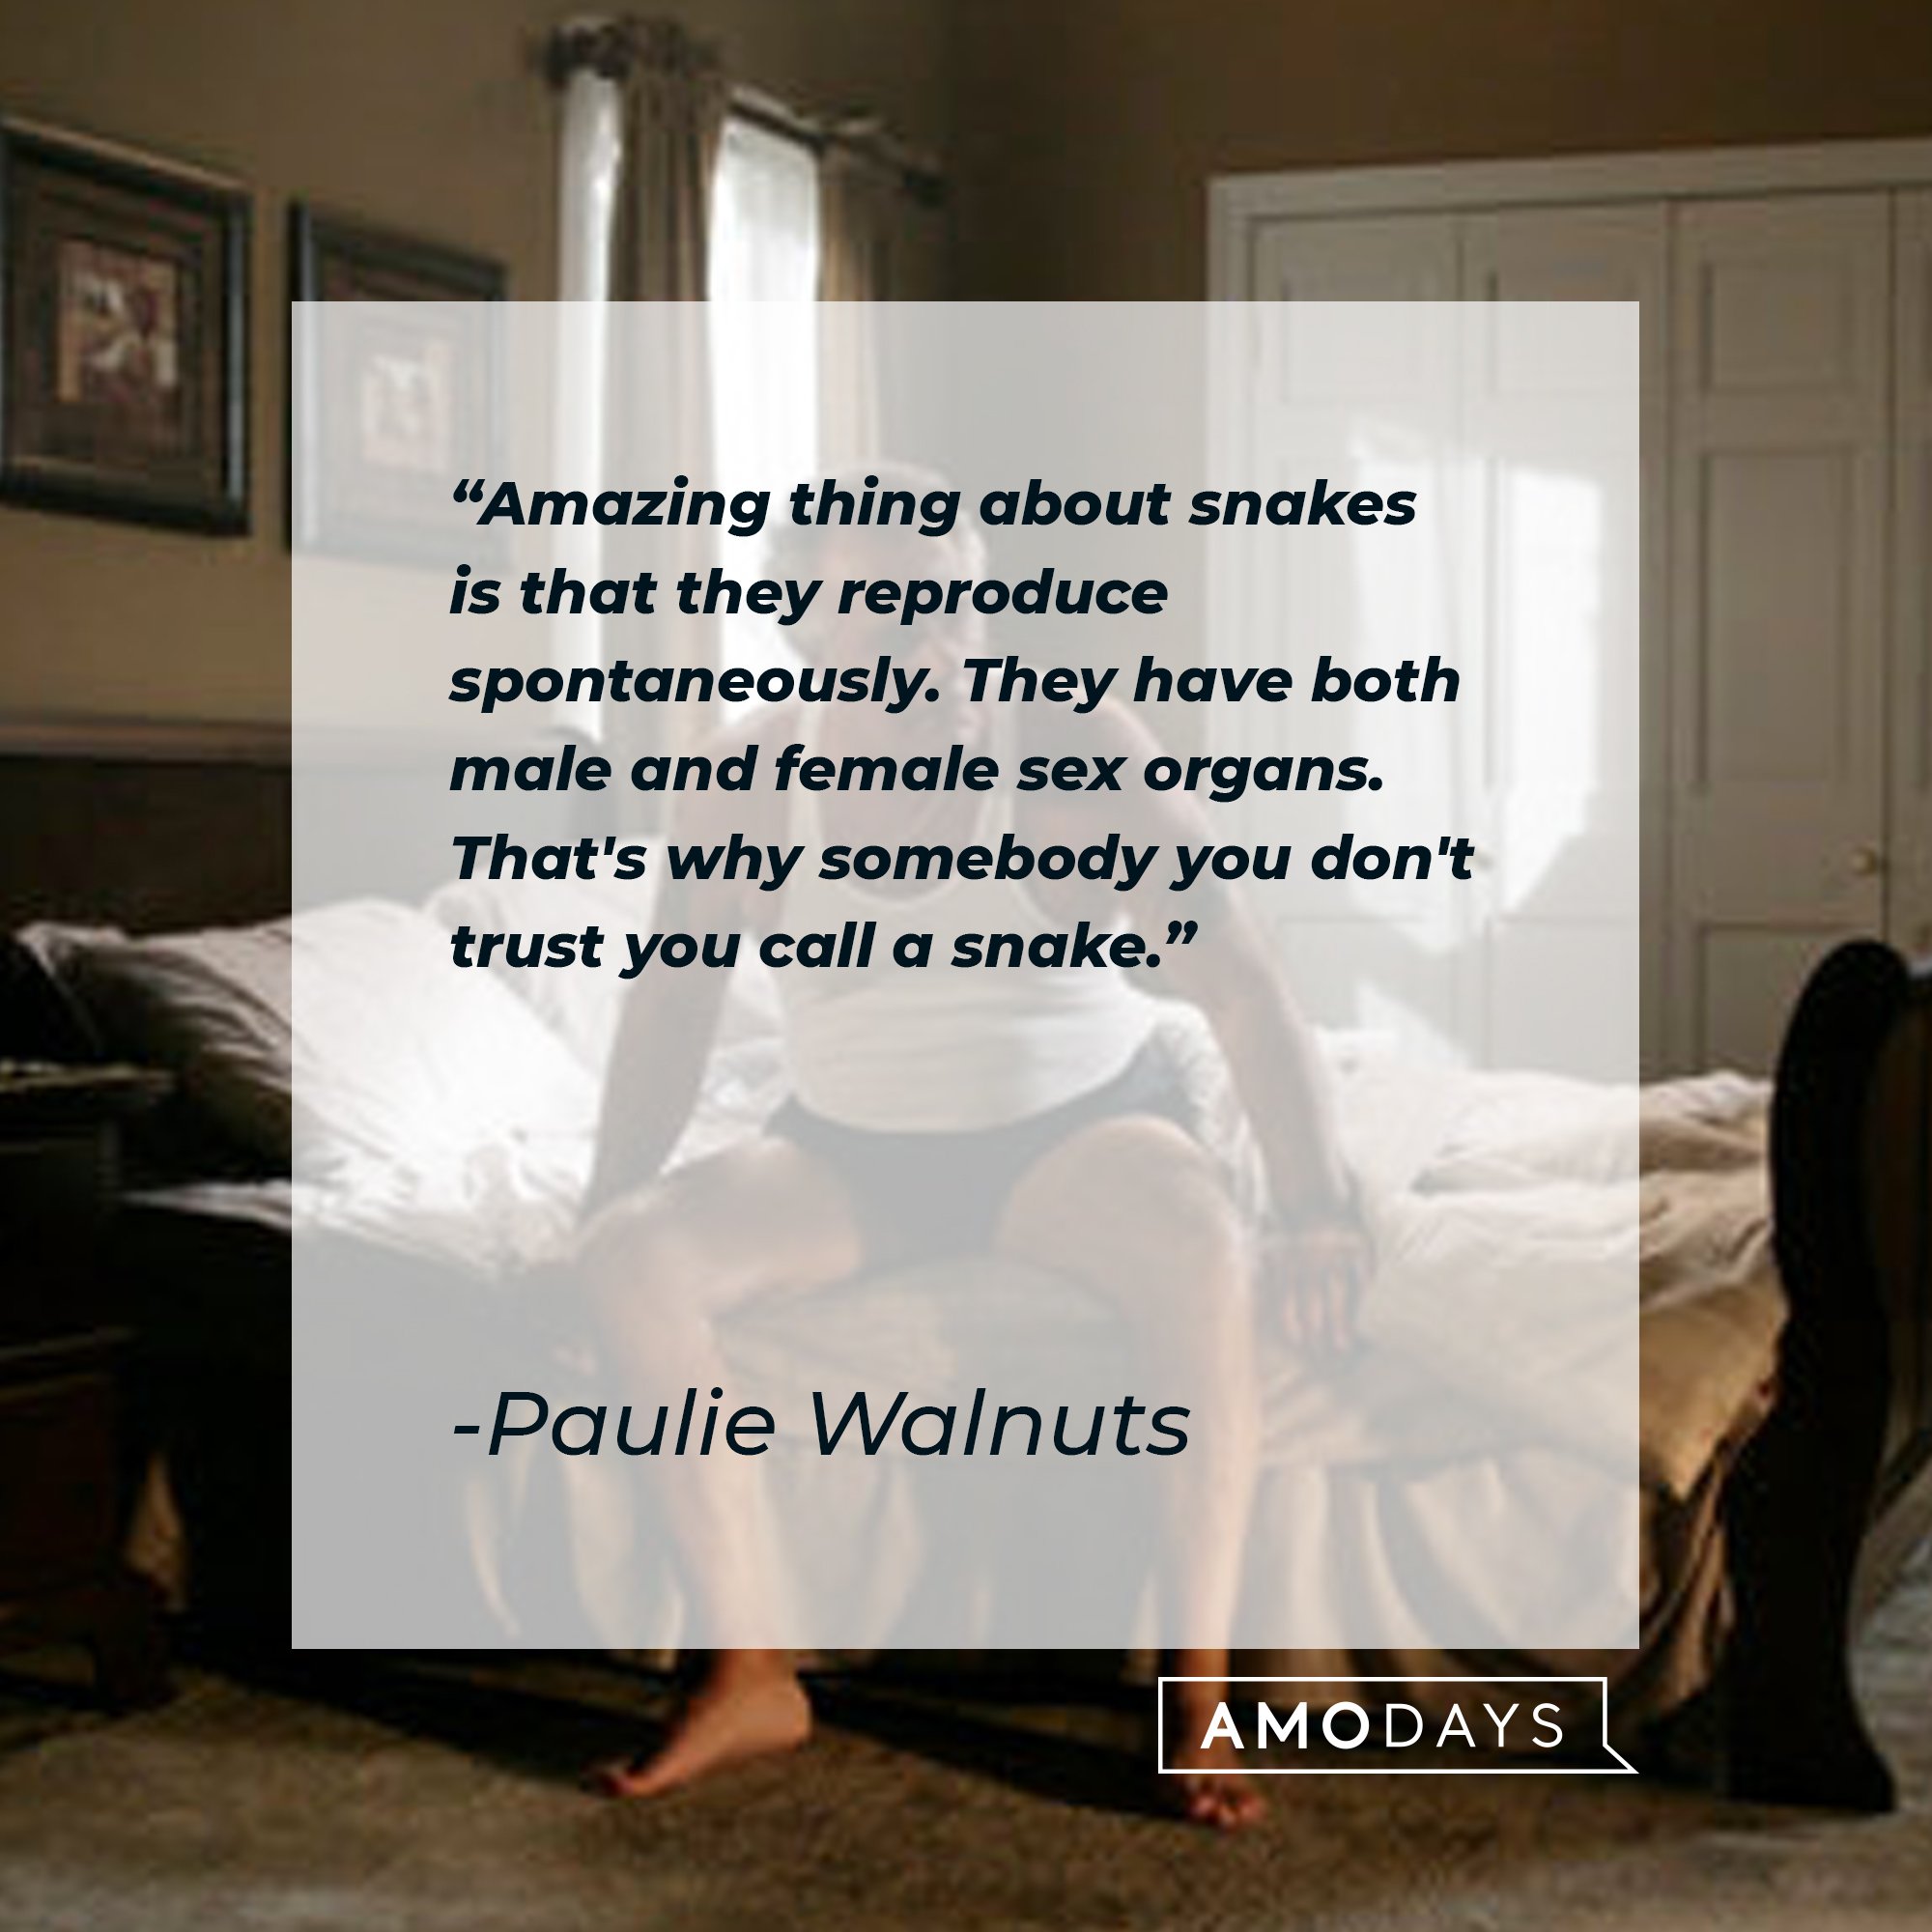 Paulie Walnuts' quote: "Amazing thing about snakes is that they reproduce spontaneously. They have both male and female sex organs. That's why somebody you don't trust you call a snake." | Image: AmoDays 